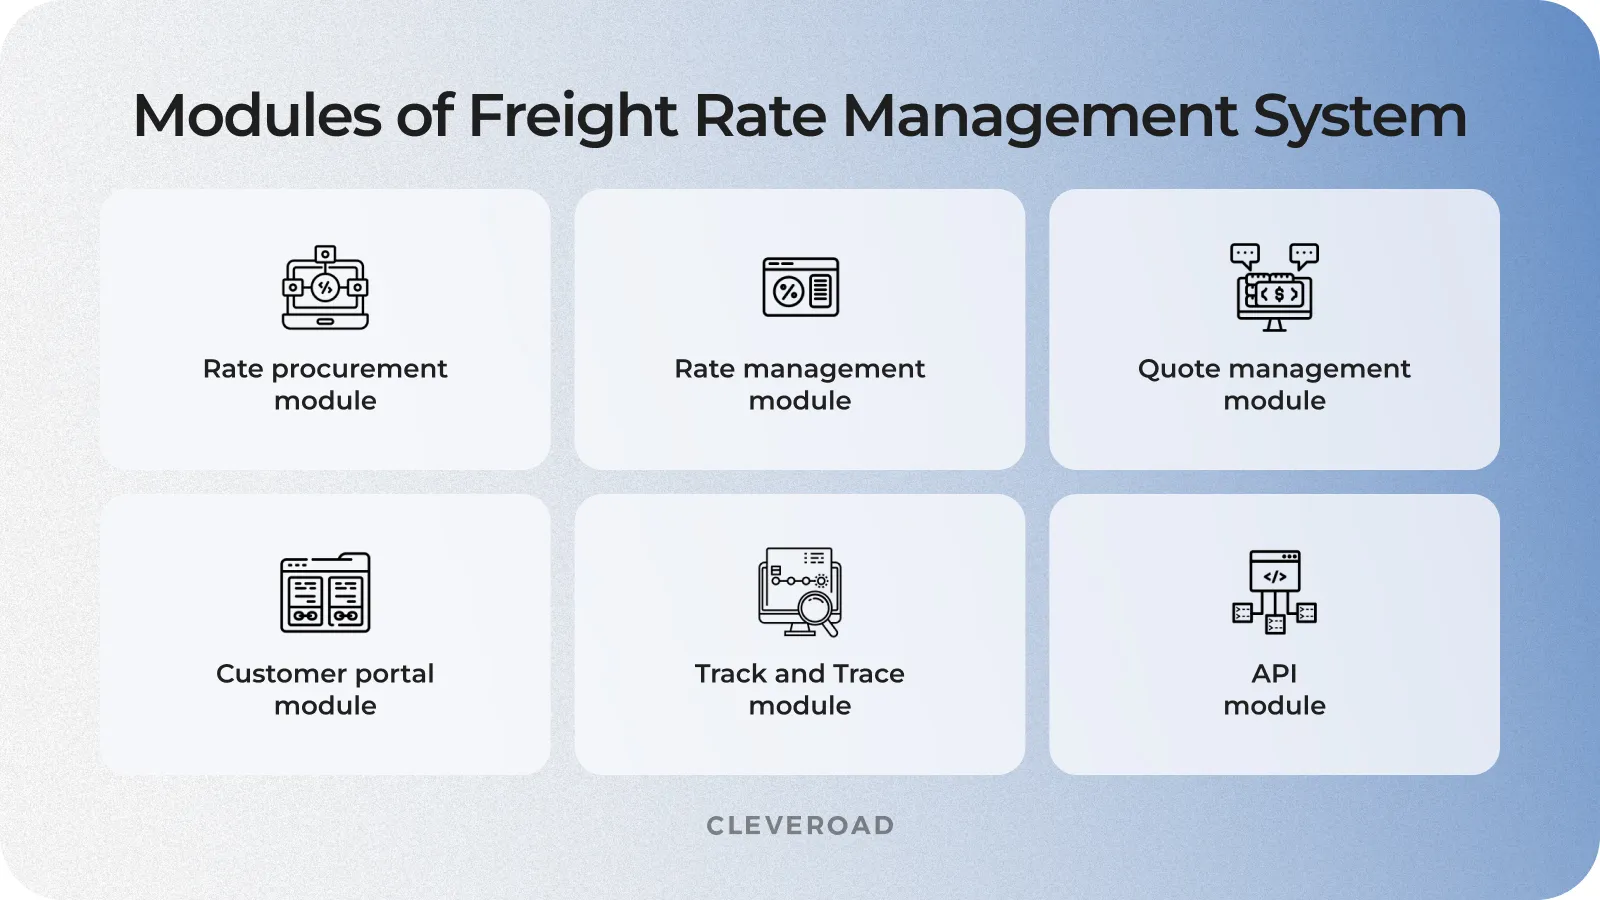 Key functionalities of freight rate management system